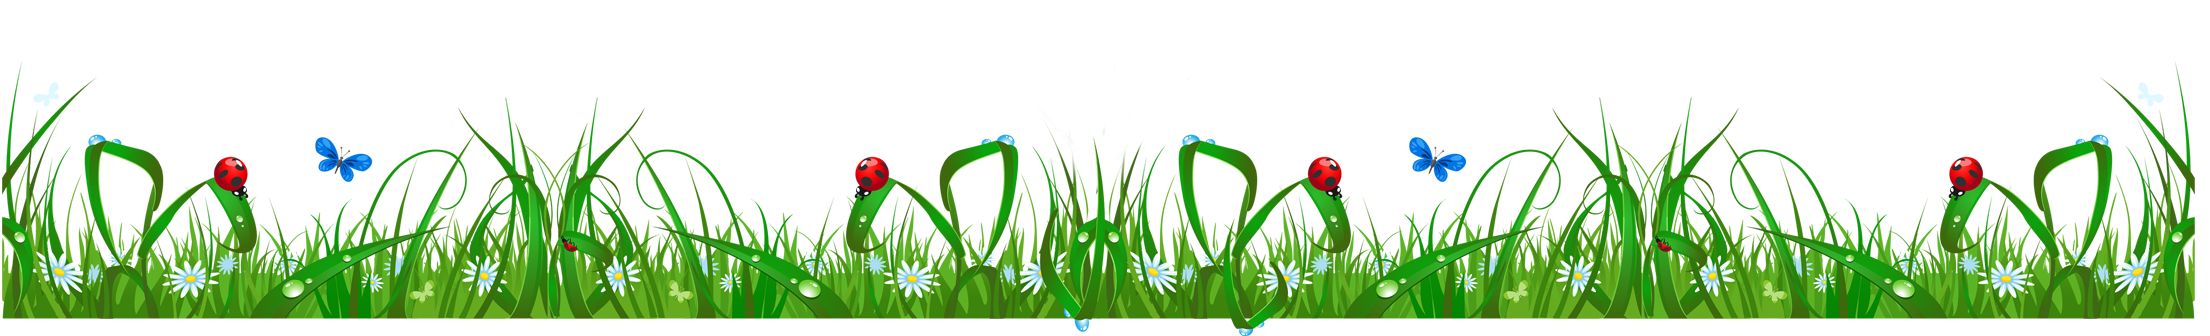 Spring Meadow Download Free Image PNG Image